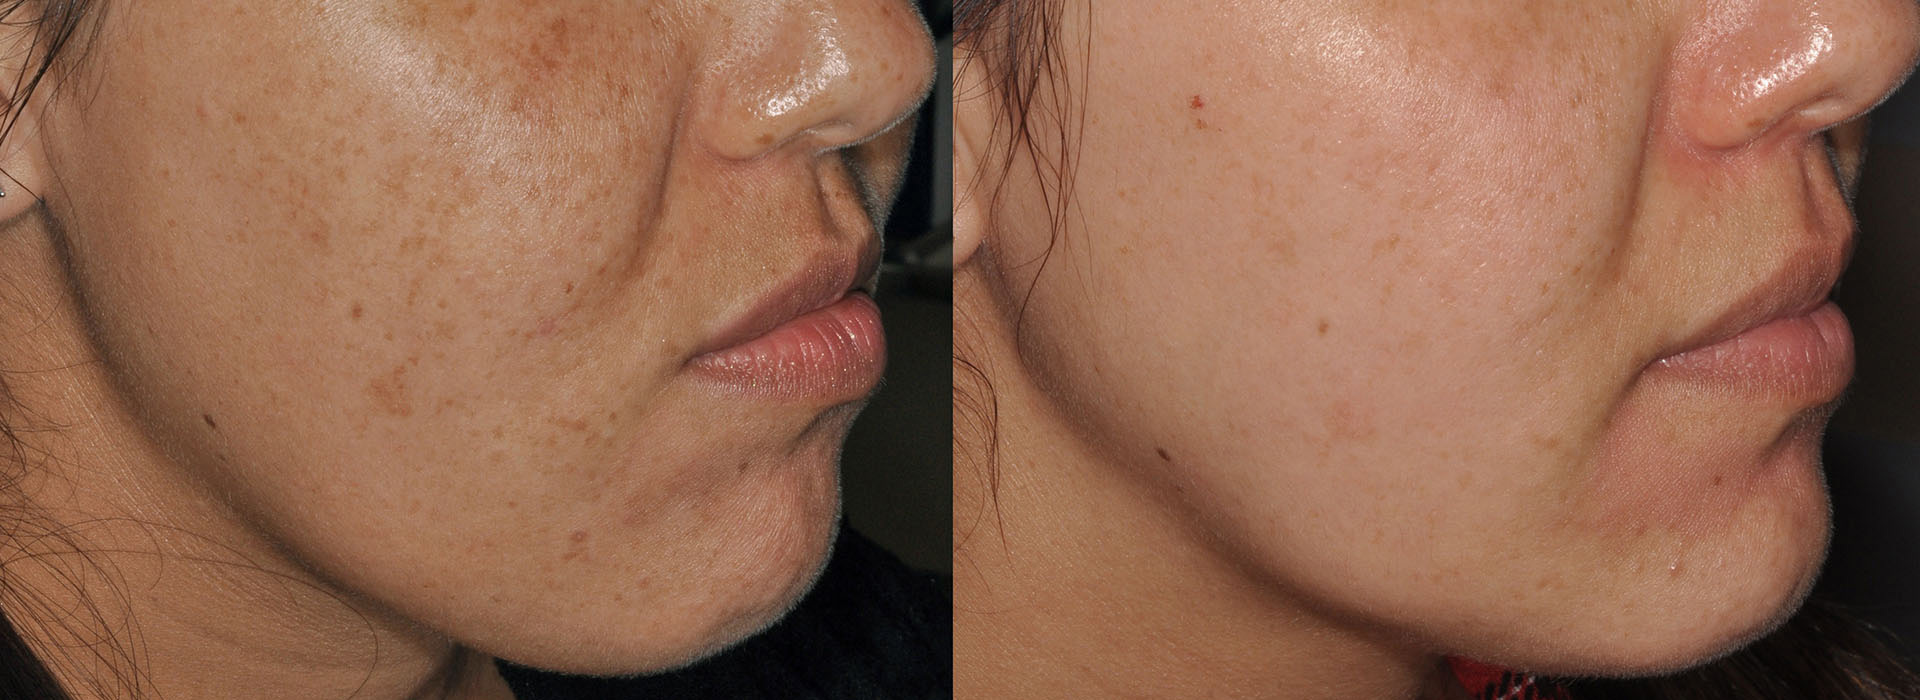 Acne scarring skin treatment before and after results image